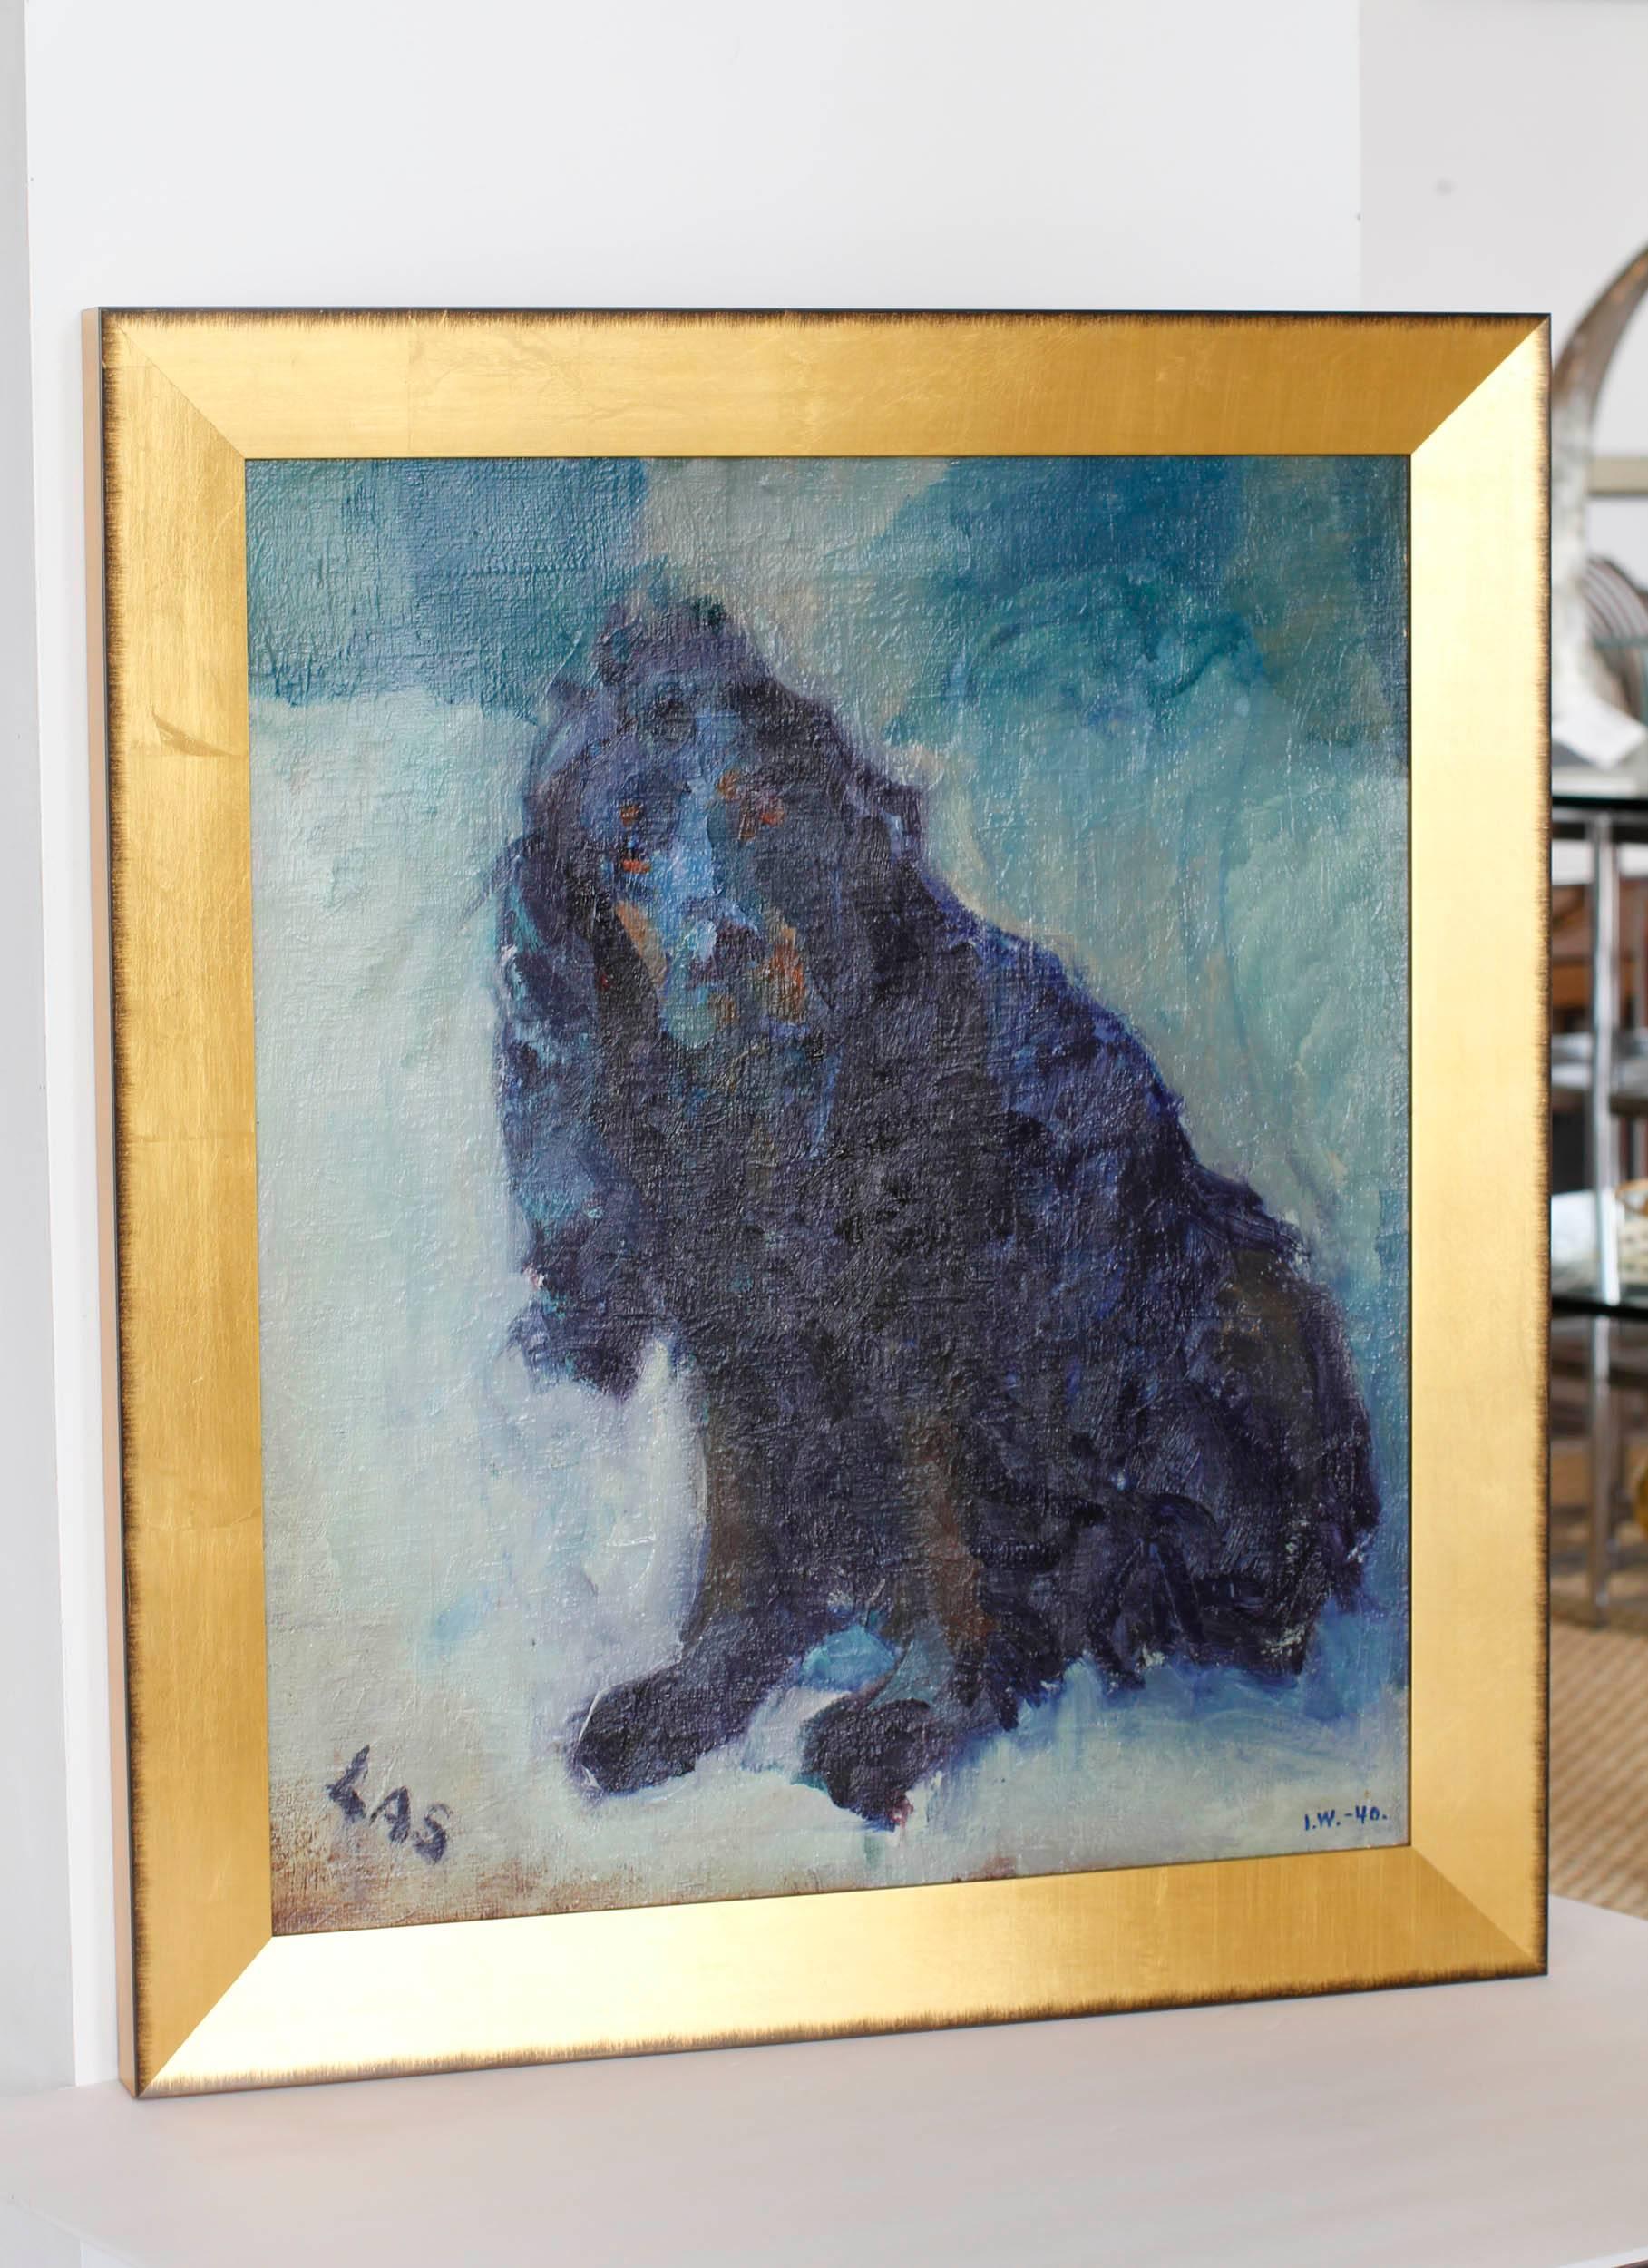 Dramatic and moody oil painting of a cocker spaniel. The vintage painting dates to the 1940s. Illegible signature.